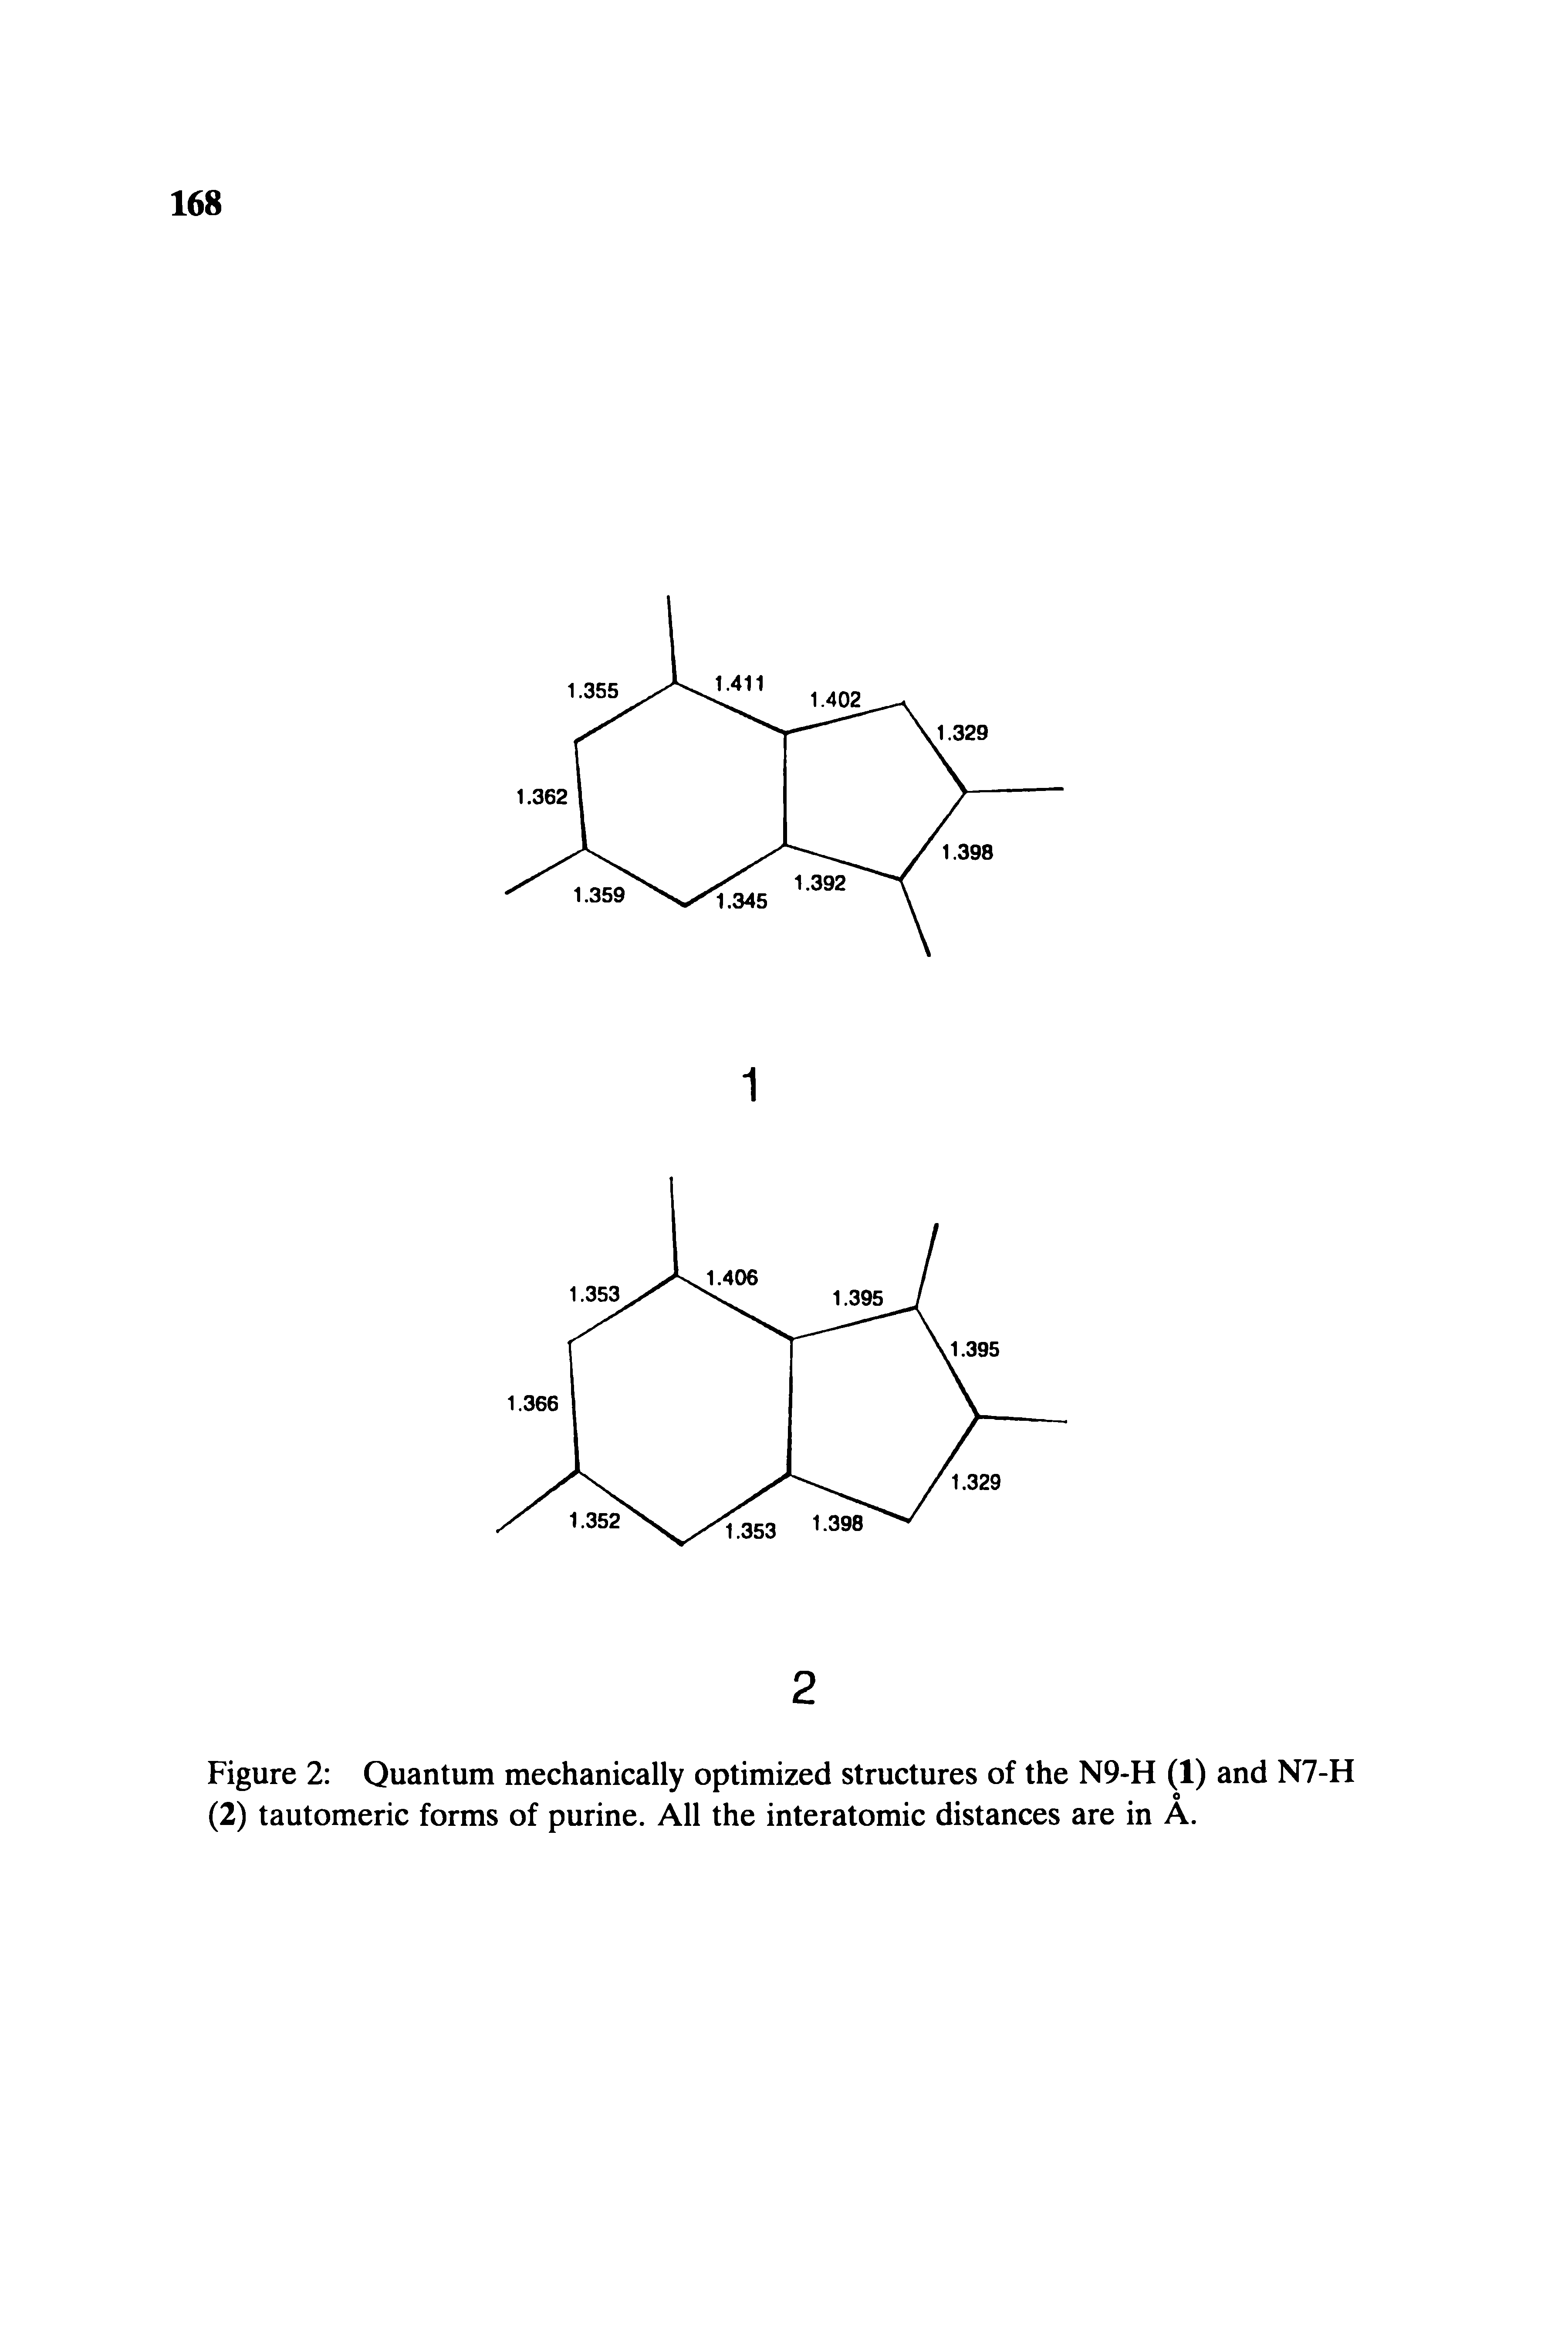 Figure 2 Quantum mechanically optimized structures of the N9-H (1) and N7-H (2) tautomeric forms of purine. All the interatomic distances are in A.